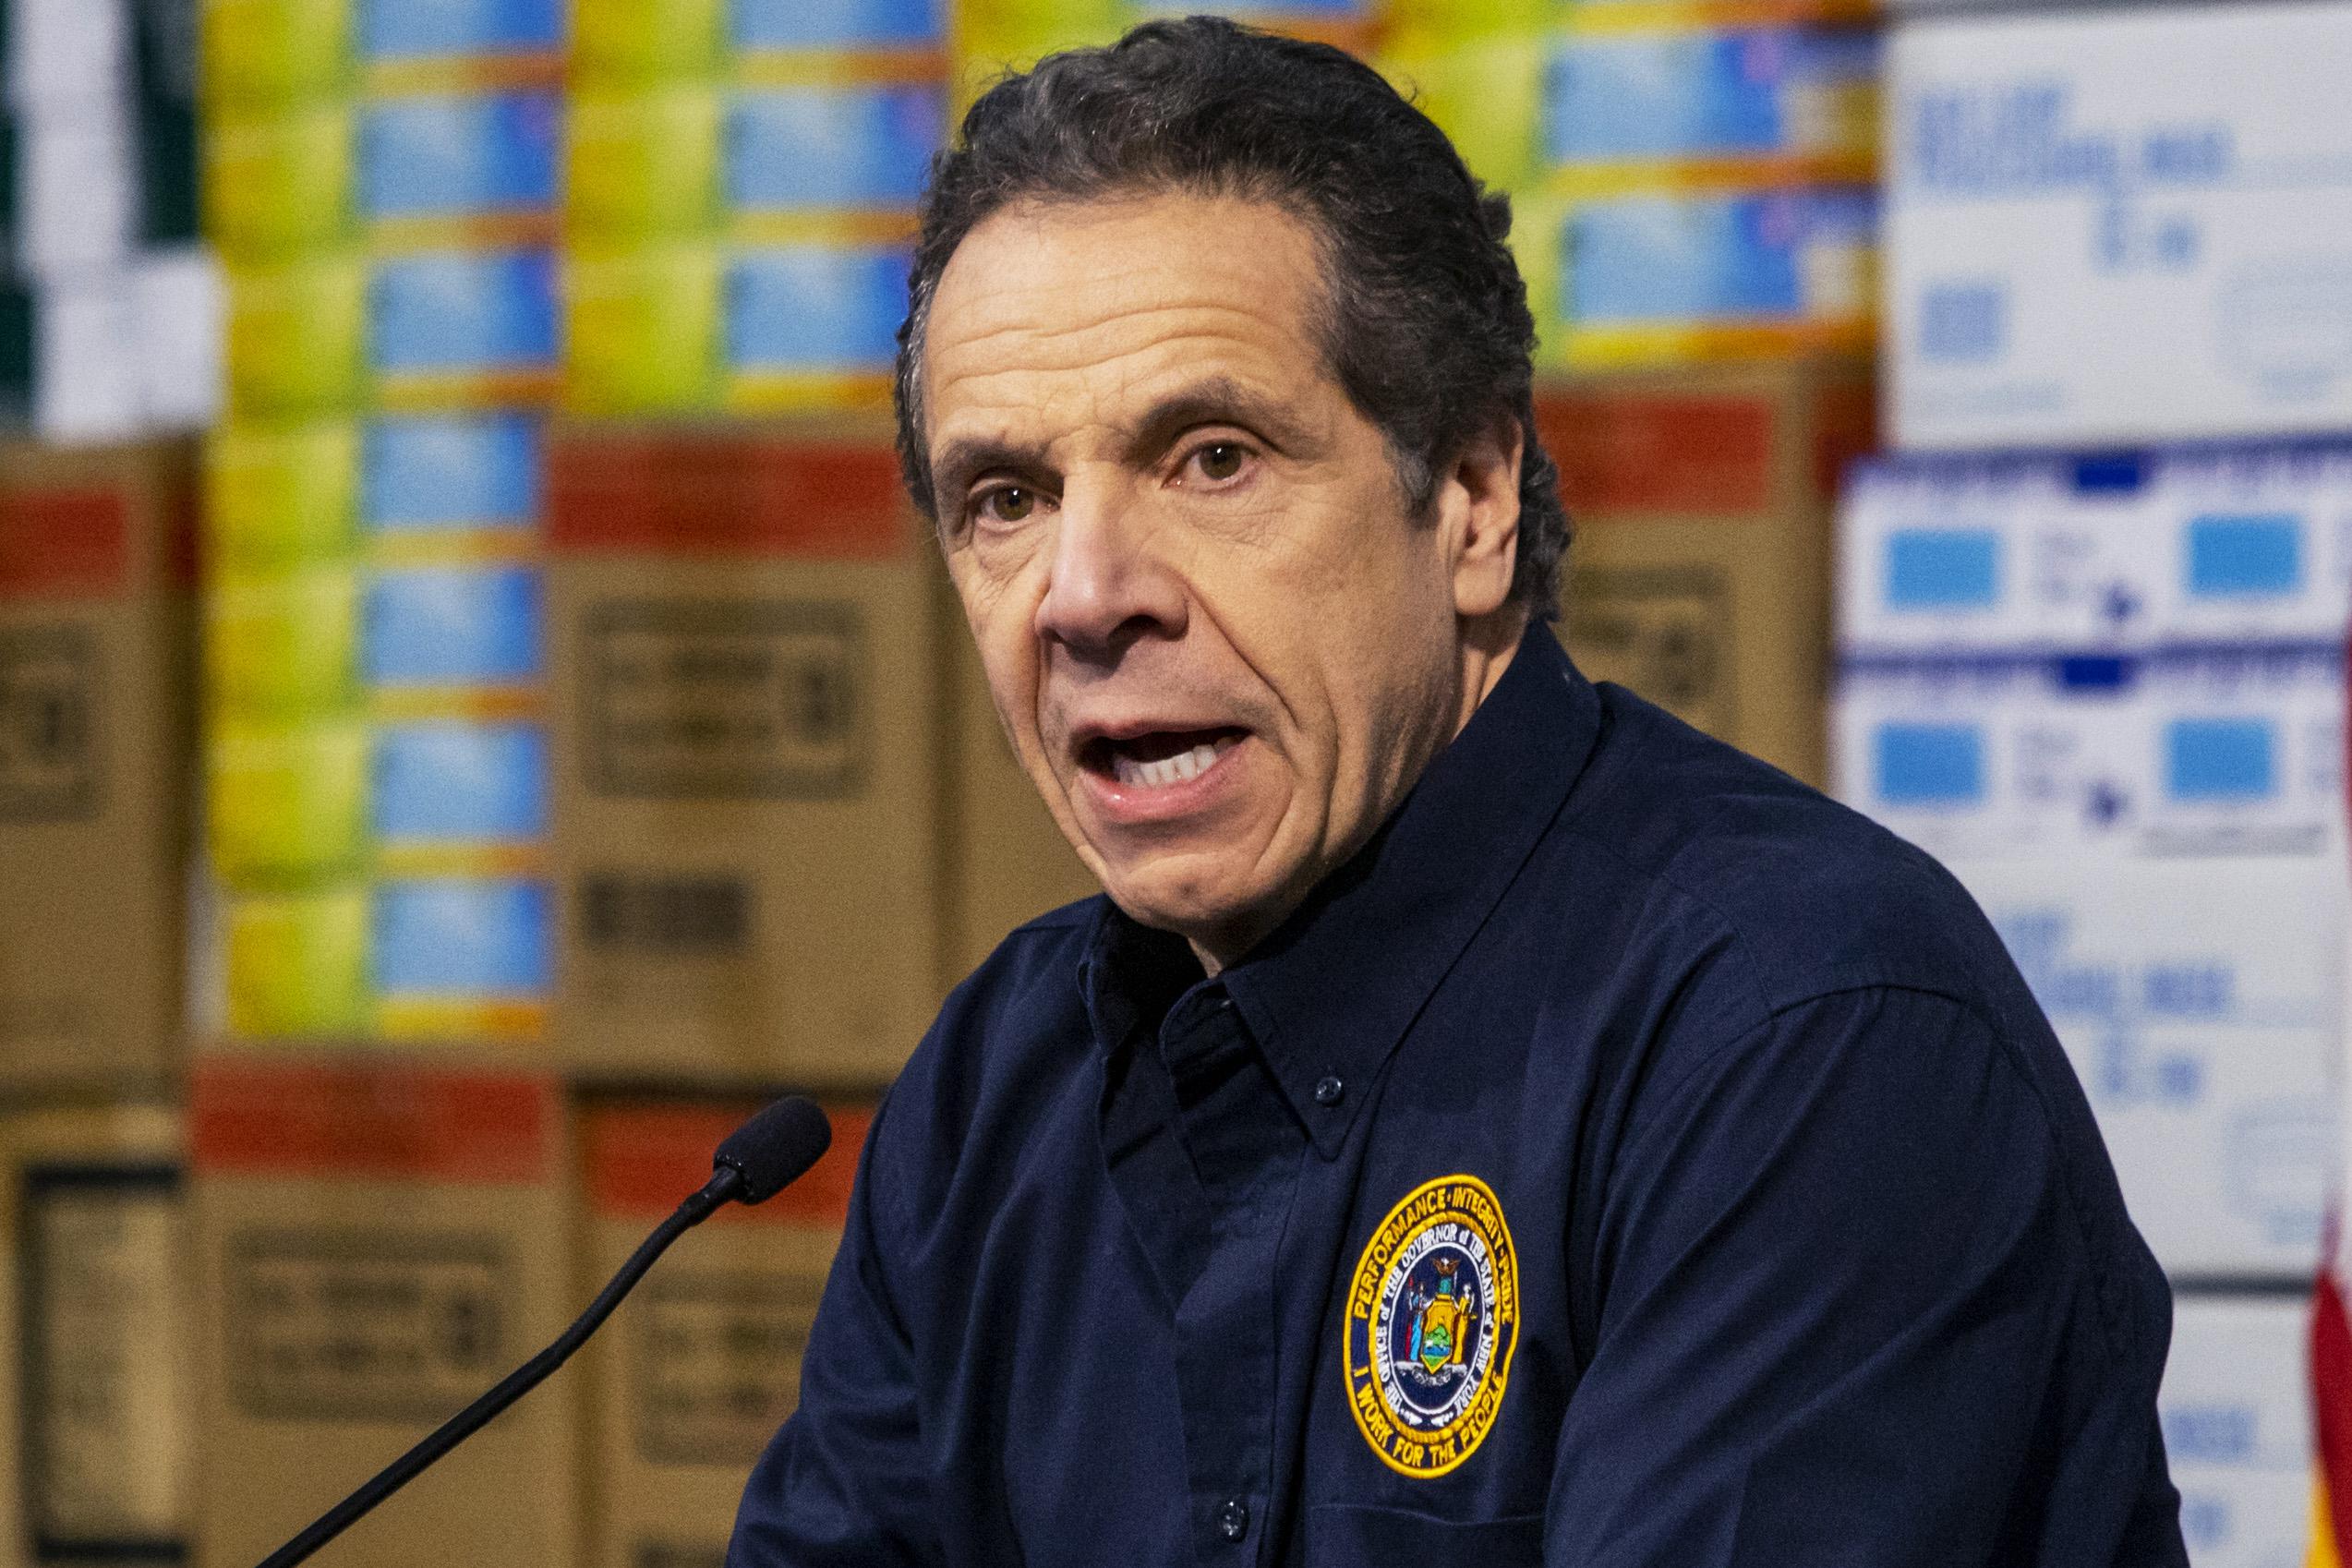 Cuomo speaks at a mic with boxes of supplies behind him